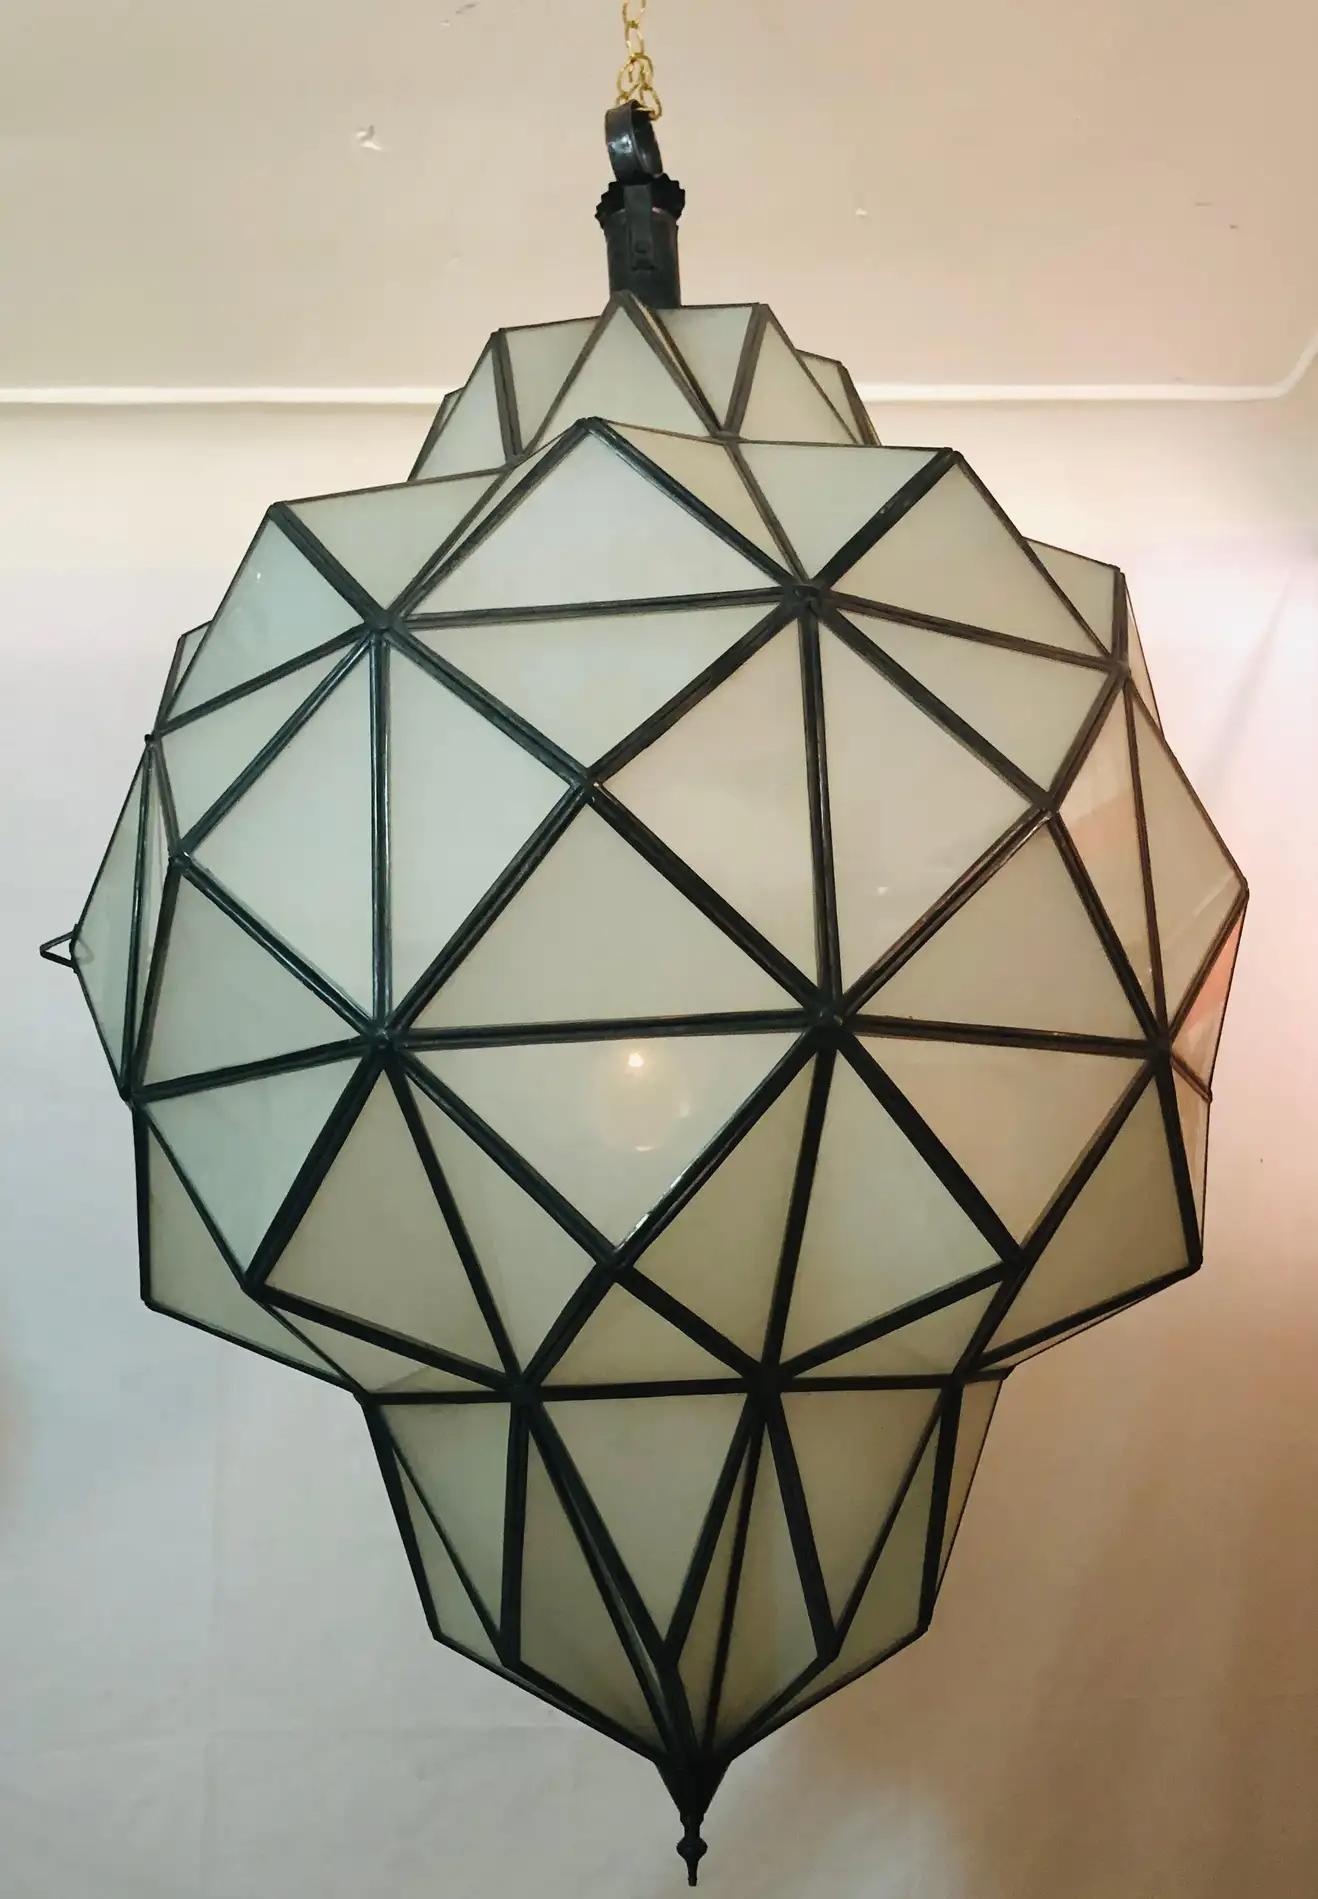 Large Art Deco while milk chandelier, pendant or lantern in dome shape
A stunning Art Deco style dome form milk glass white chandelier or lantern.  Having individual hand cut panes and possessing an open door pane leading to a double recently wired